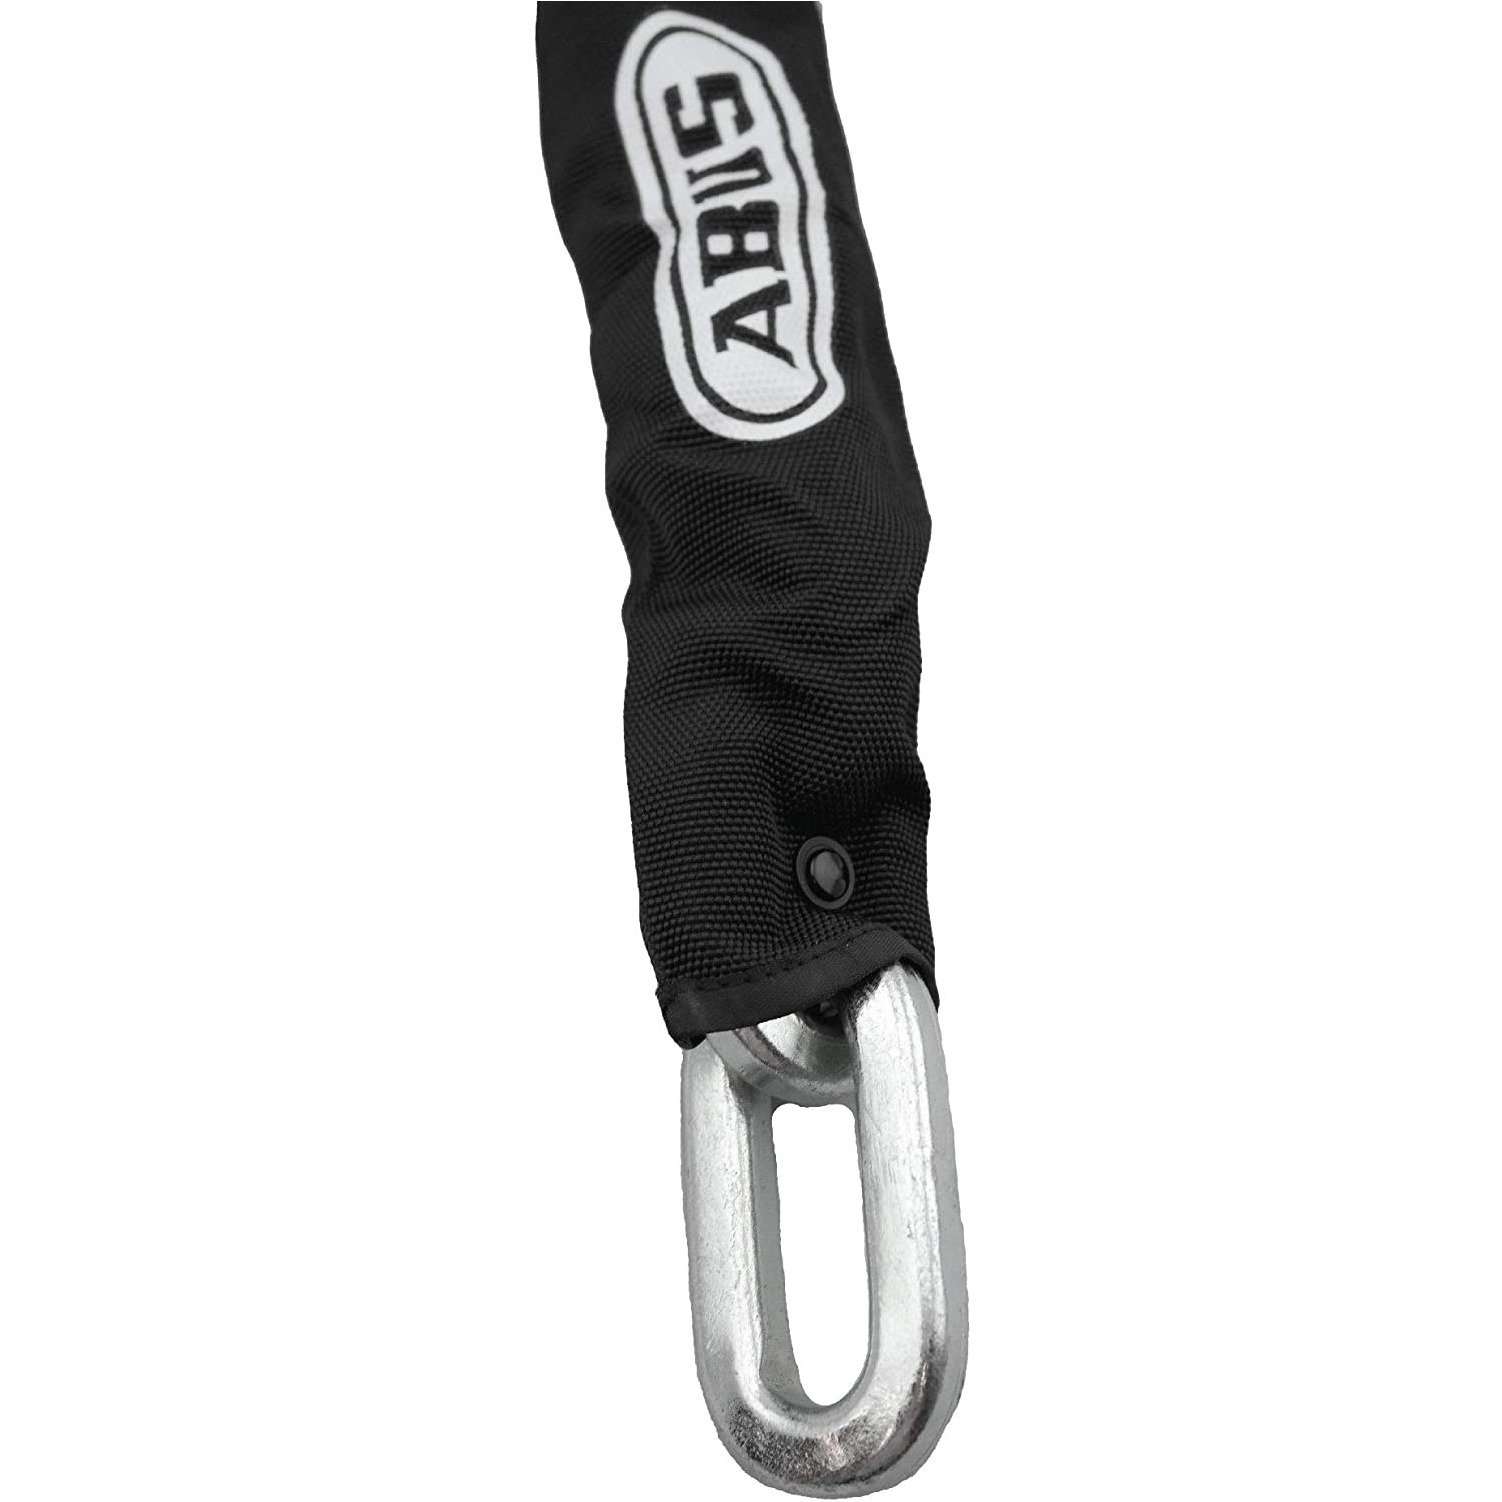 Abus 8KS Custom Length Sleeve Only for 5/16 Thick Chains - The